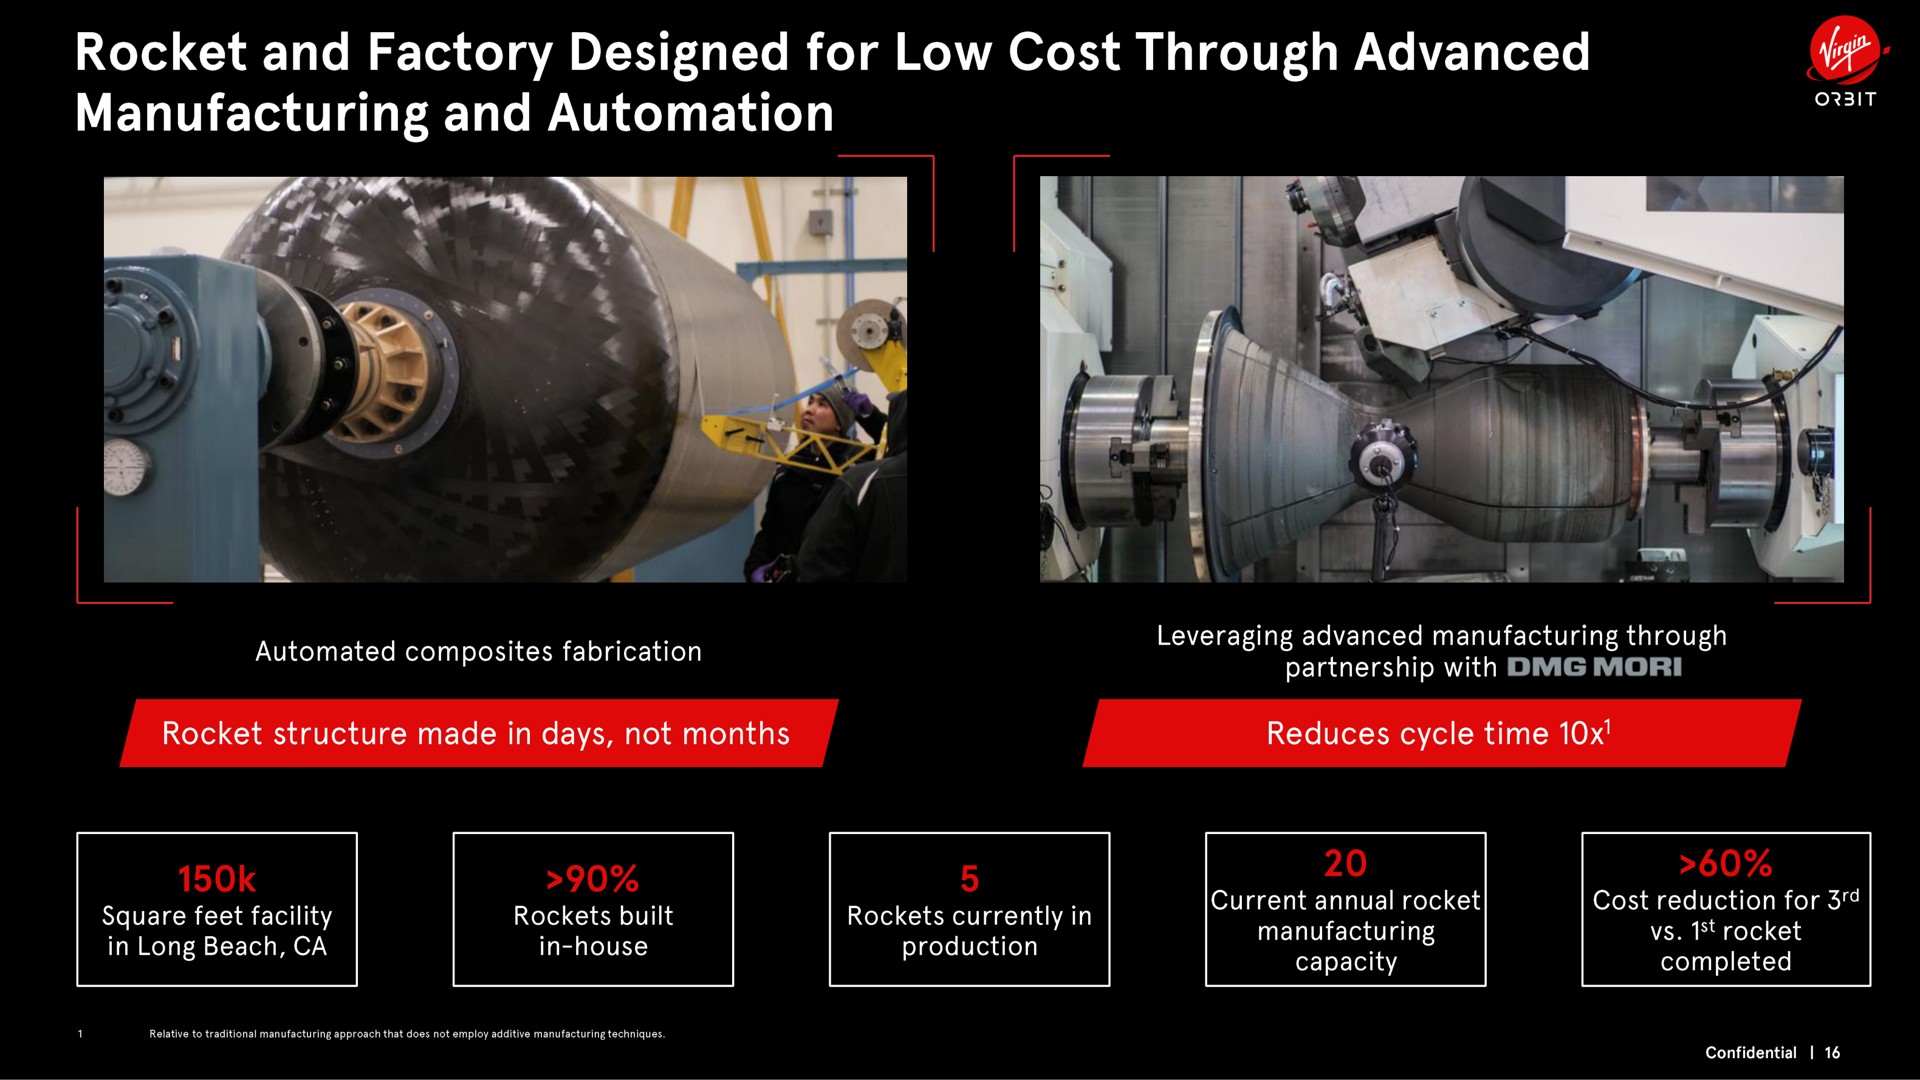 rocket and factory designed for low cost through advanced manufacturing and a | Virgin Orbit